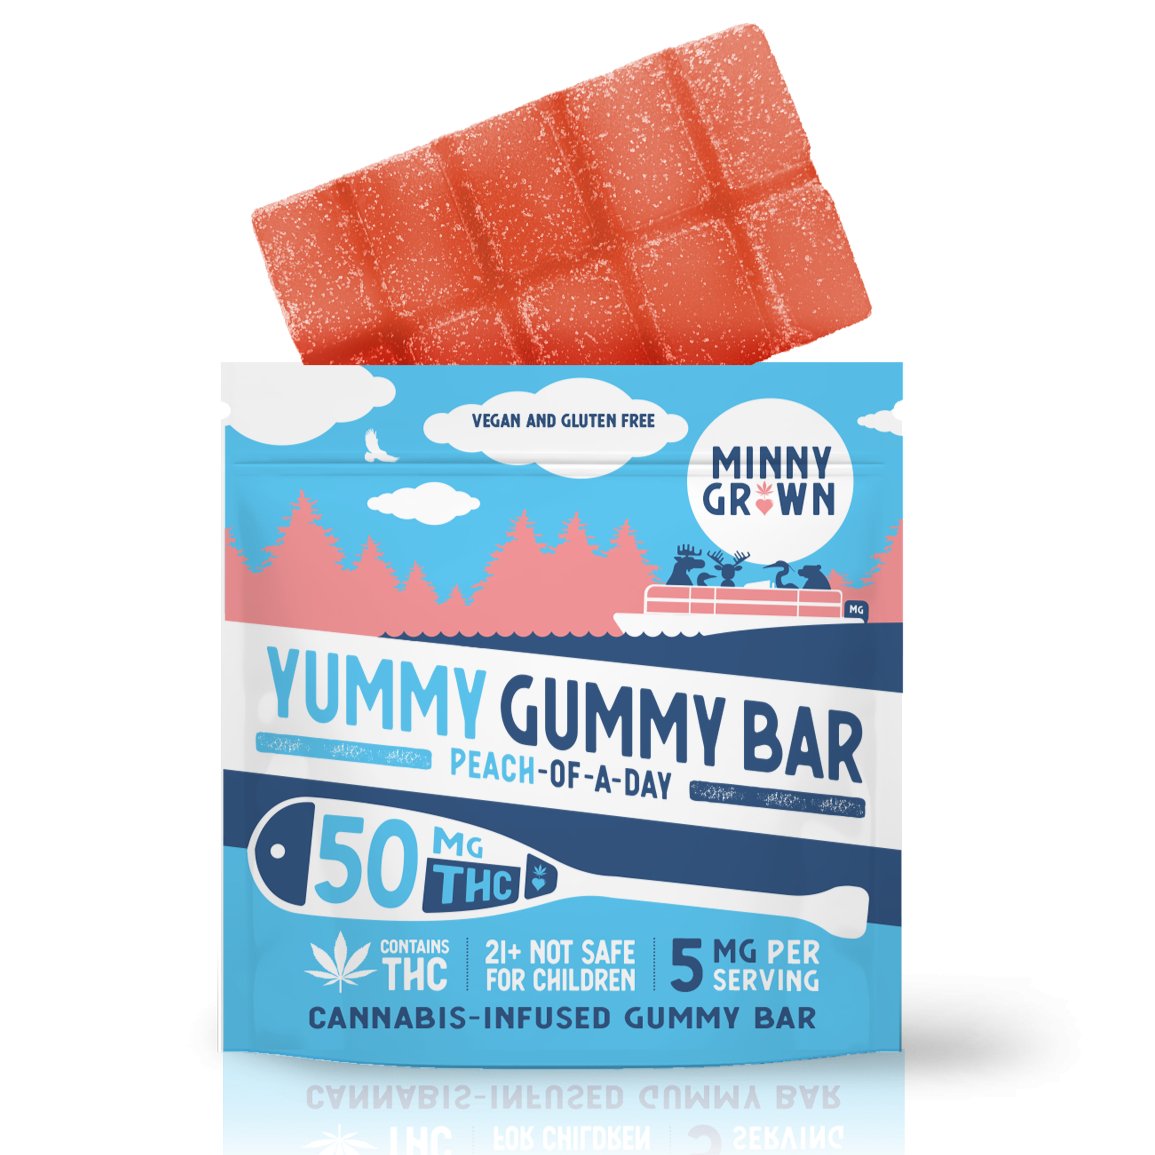 MINNY GROWN Cannabis Infused Gummy Bars 50 mg THC (4 Flavors)